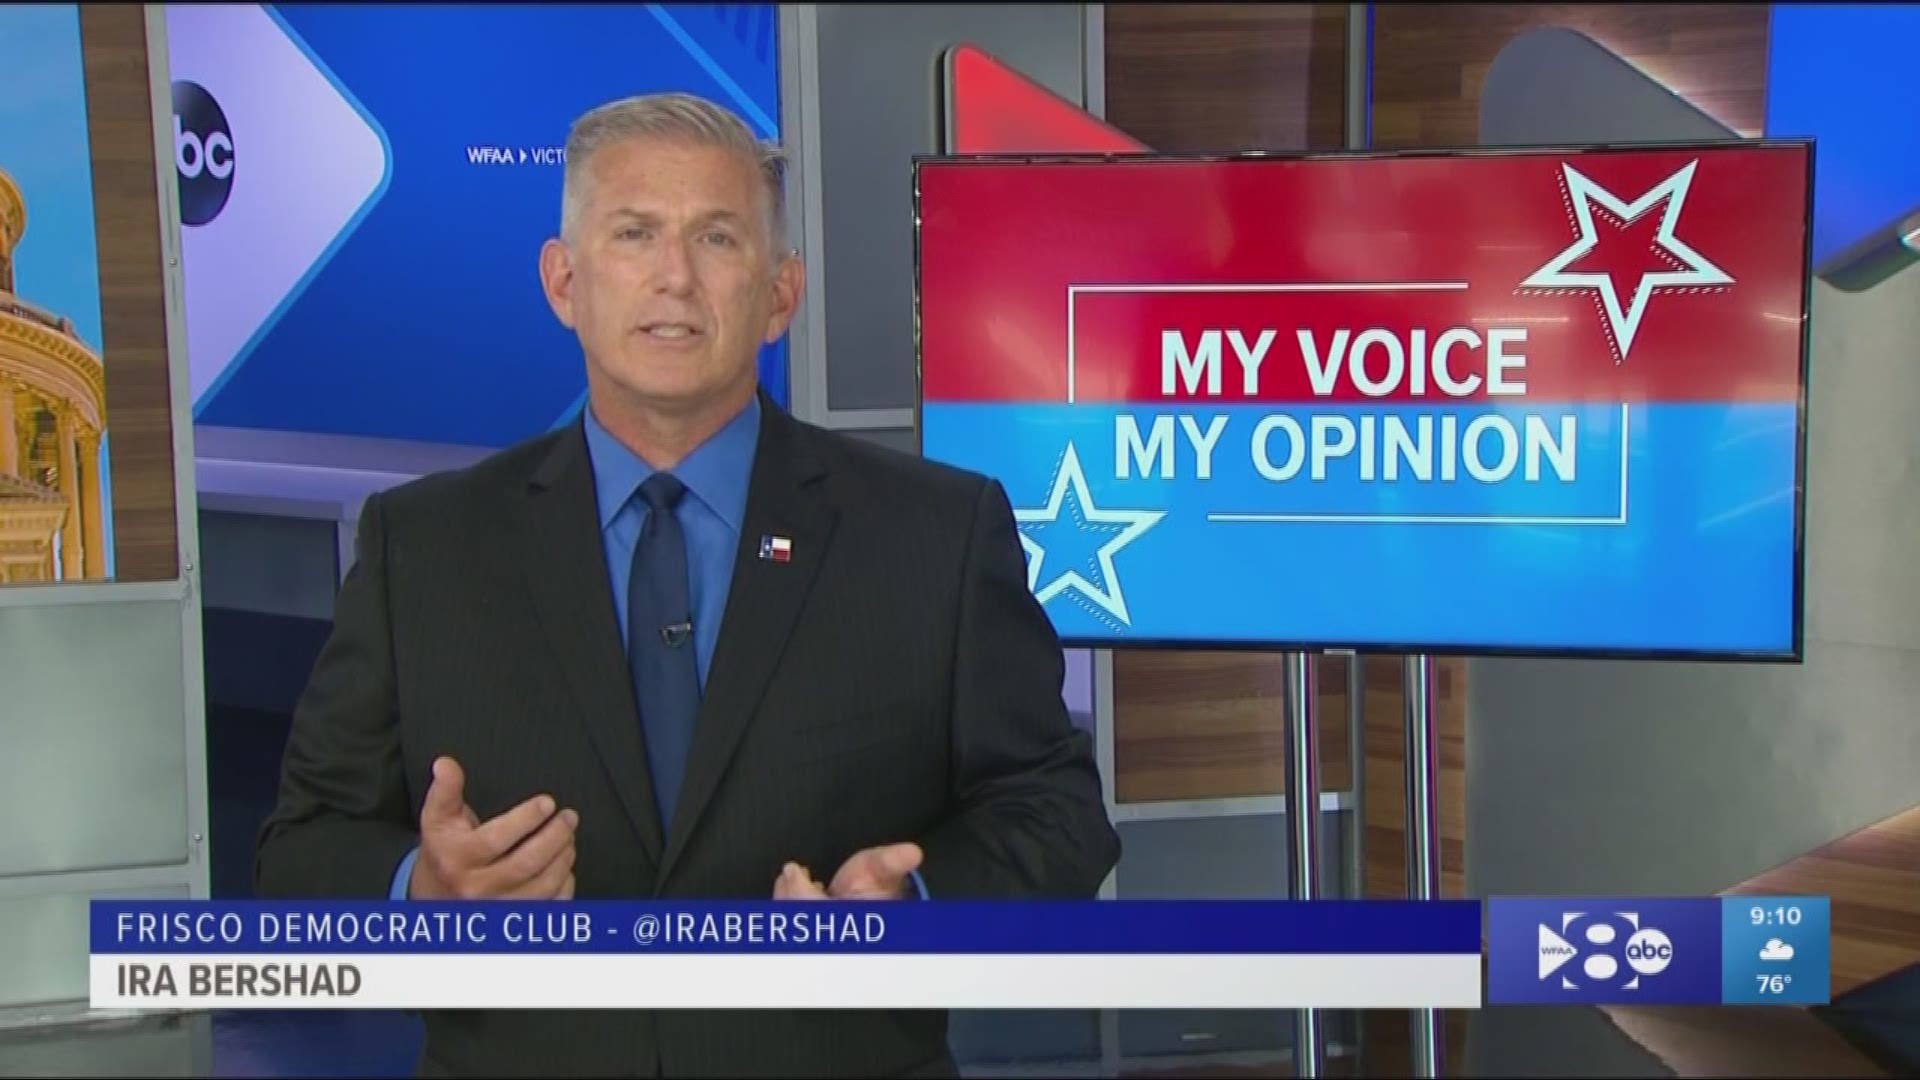 Ira Bershad from the Frisco Democratic Club weighted in on the topic of redistricting in this week’s My Voice, My Opinion.